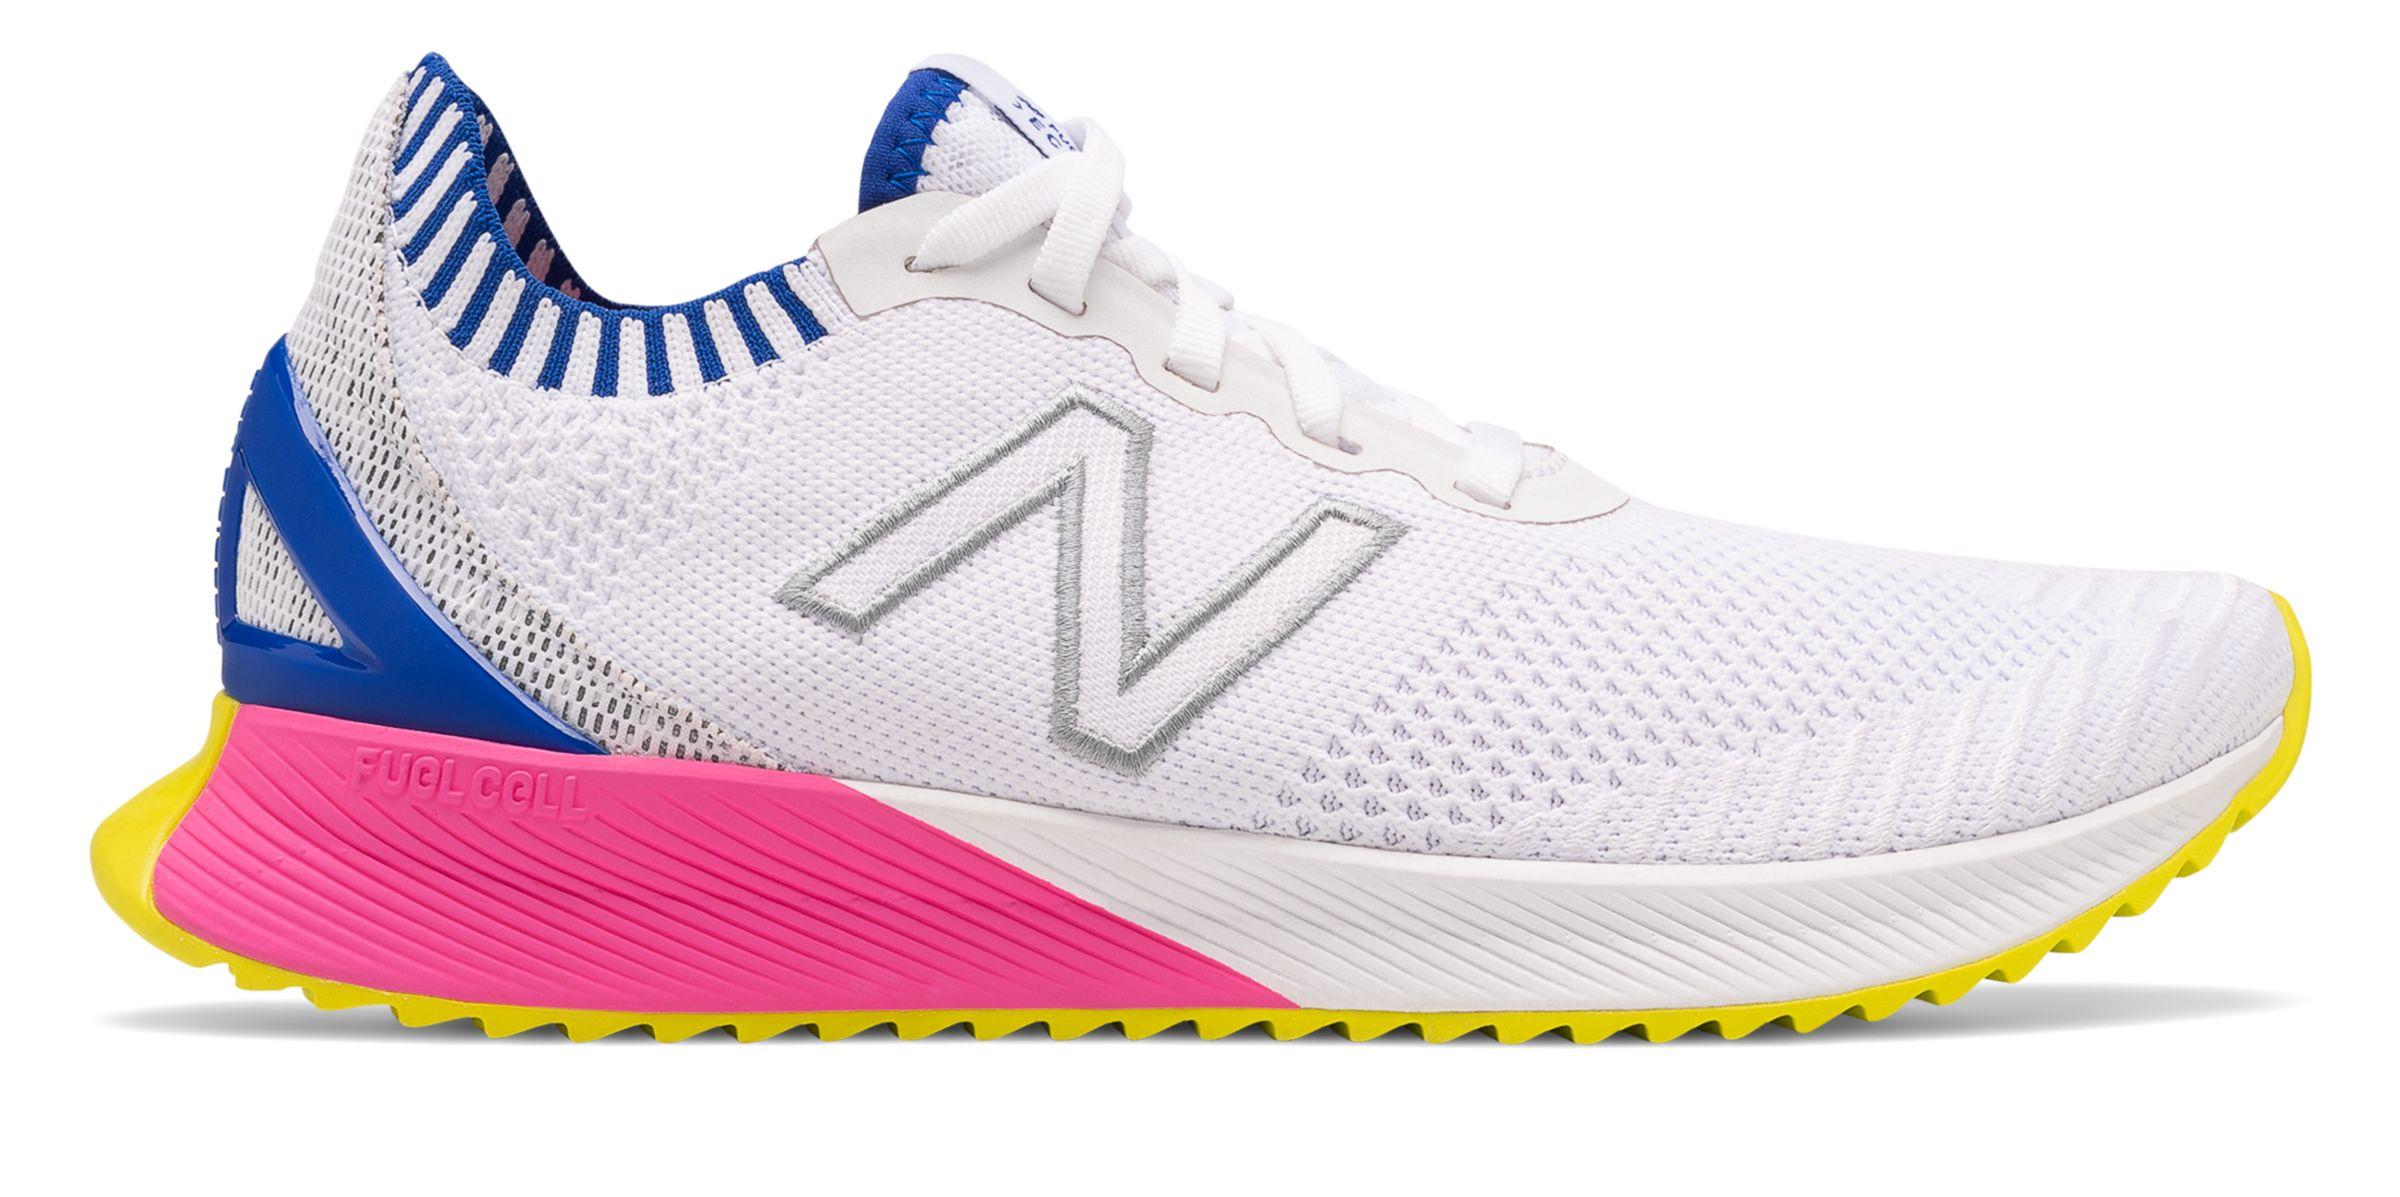 New Balance Rubber Fuelcell Echo - Lyst